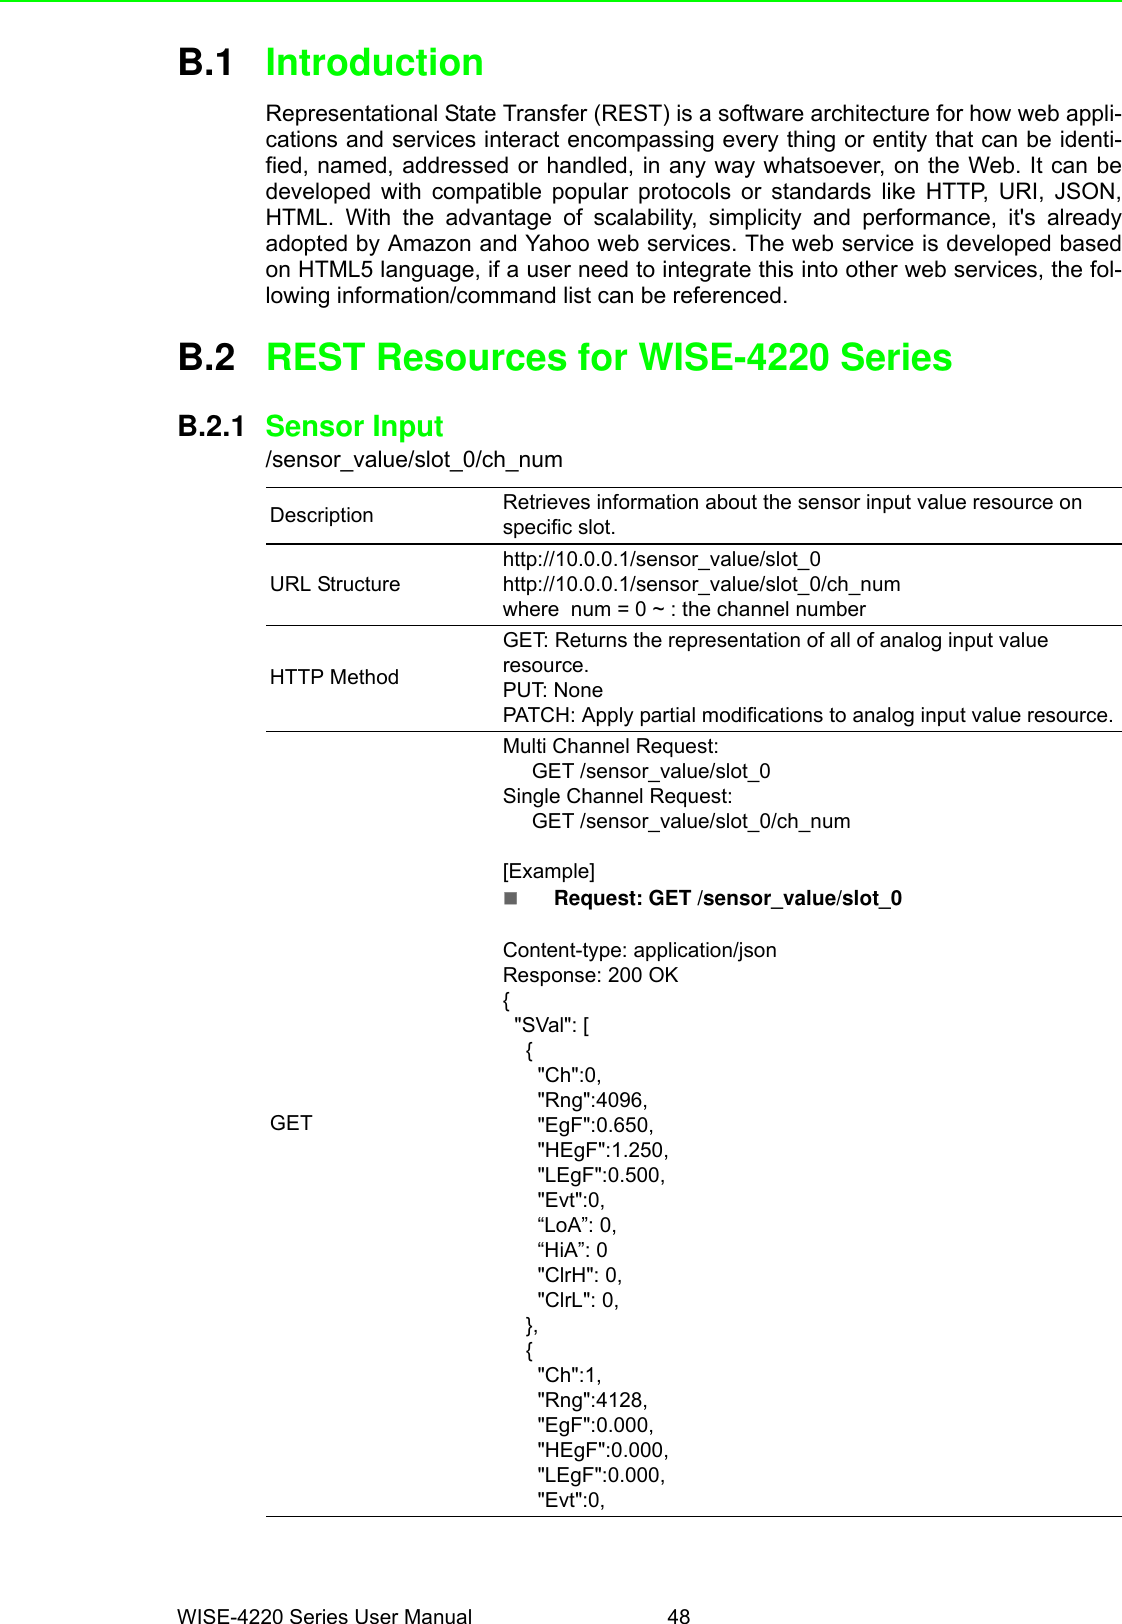 WISE-4220 Series User Manual 48B.1 IntroductionRepresentational State Transfer (REST) is a software architecture for how web appli-cations and services interact encompassing every thing or entity that can be identi-fied, named, addressed or handled, in any way whatsoever, on the Web. It can bedeveloped with compatible popular protocols or standards like HTTP, URI, JSON,HTML. With the advantage of scalability, simplicity and performance, it&apos;s alreadyadopted by Amazon and Yahoo web services. The web service is developed basedon HTML5 language, if a user need to integrate this into other web services, the fol-lowing information/command list can be referenced.B.2 REST Resources for WISE-4220 SeriesB.2.1 Sensor Input/sensor_value/slot_0/ch_numDescription Retrieves information about the sensor input value resource on specific slot.URL Structurehttp://10.0.0.1/sensor_value/slot_0http://10.0.0.1/sensor_value/slot_0/ch_numwhere  num = 0 ~ : the channel numberHTTP MethodGET: Returns the representation of all of analog input value resource.PUT: NonePATCH: Apply partial modifications to analog input value resource.GET      Multi Channel Request:     GET /sensor_value/slot_0Single Channel Request:     GET /sensor_value/slot_0/ch_num[Example]Request: GET /sensor_value/slot_0Content-type: application/jsonResponse: 200 OK{  &quot;SVal&quot;: [    {      &quot;Ch&quot;:0,      &quot;Rng&quot;:4096,      &quot;EgF&quot;:0.650,      &quot;HEgF&quot;:1.250,      &quot;LEgF&quot;:0.500,      &quot;Evt&quot;:0,      “LoA”: 0,      “HiA”: 0      &quot;ClrH&quot;: 0,      &quot;ClrL&quot;: 0,    },    {      &quot;Ch&quot;:1,      &quot;Rng&quot;:4128,      &quot;EgF&quot;:0.000,      &quot;HEgF&quot;:0.000,      &quot;LEgF&quot;:0.000,      &quot;Evt&quot;:0,